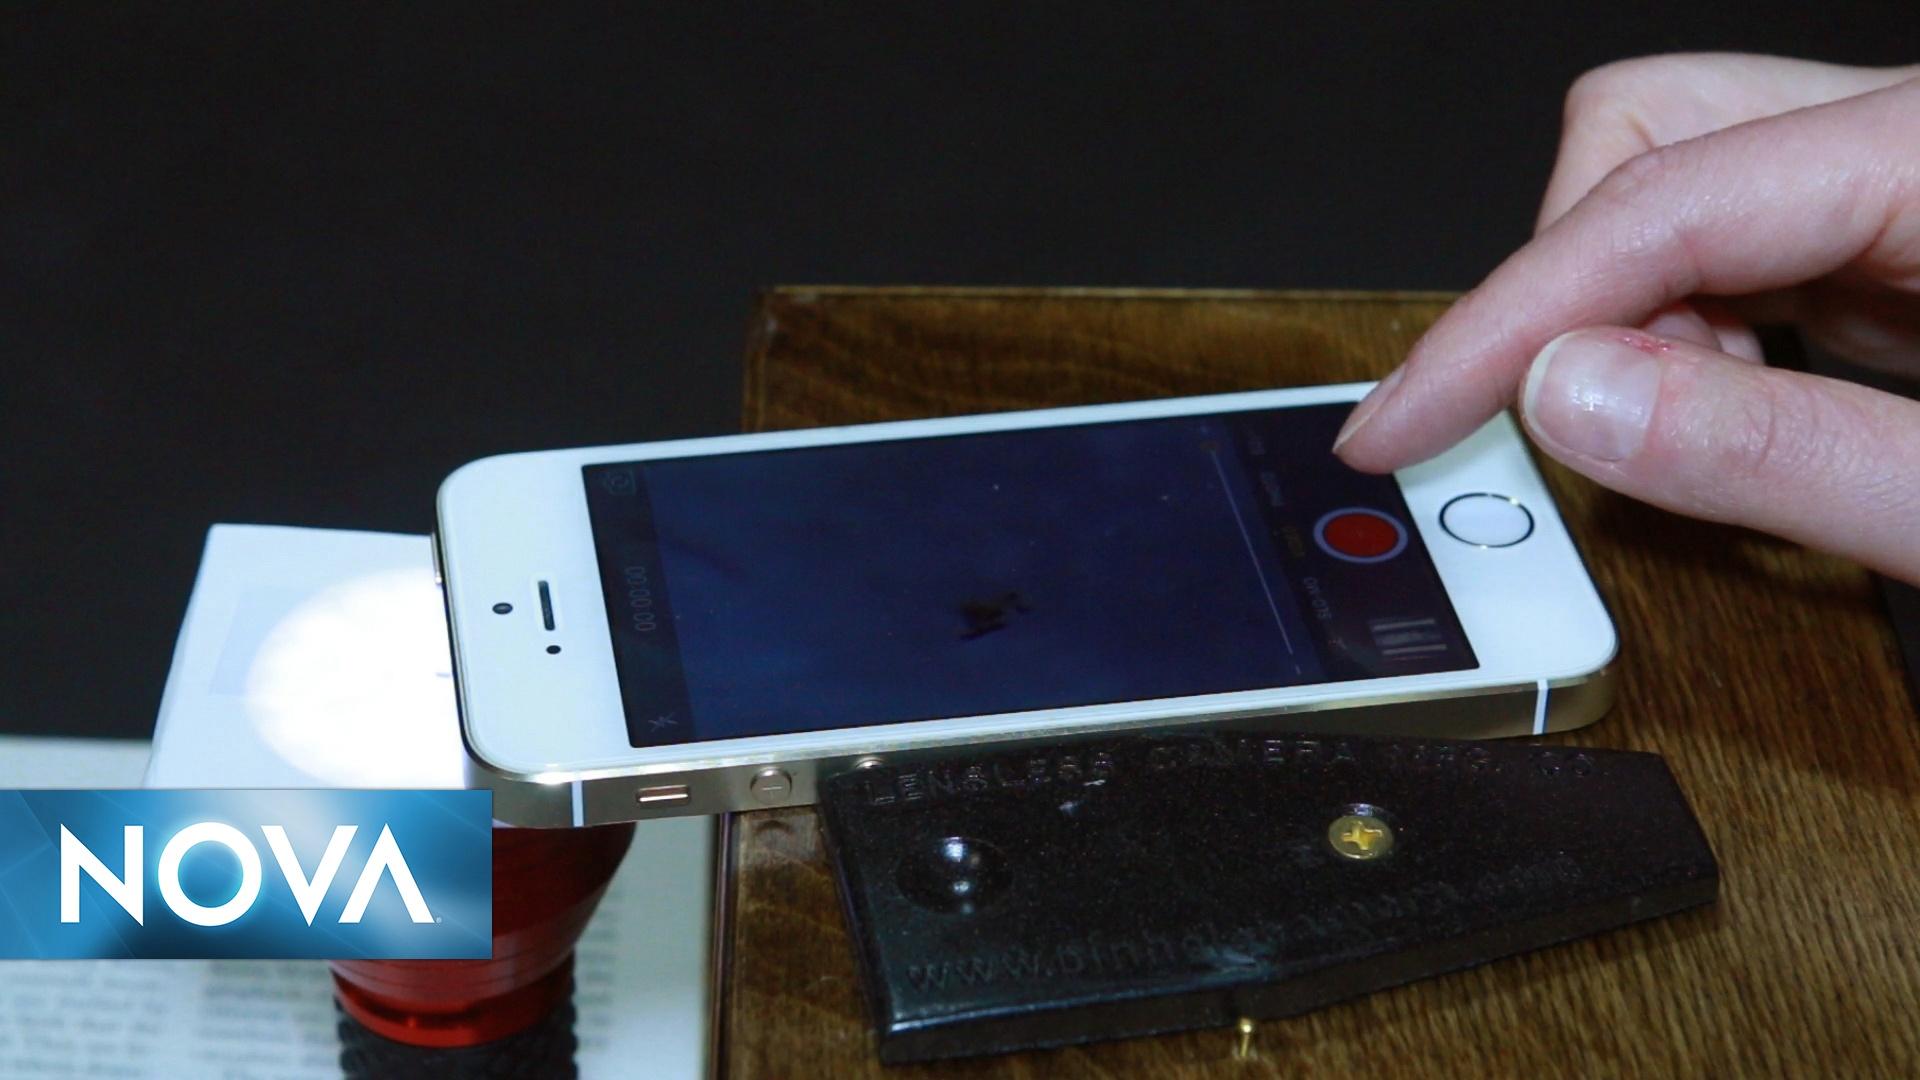 See Microbes with This DIY Phone Microscope